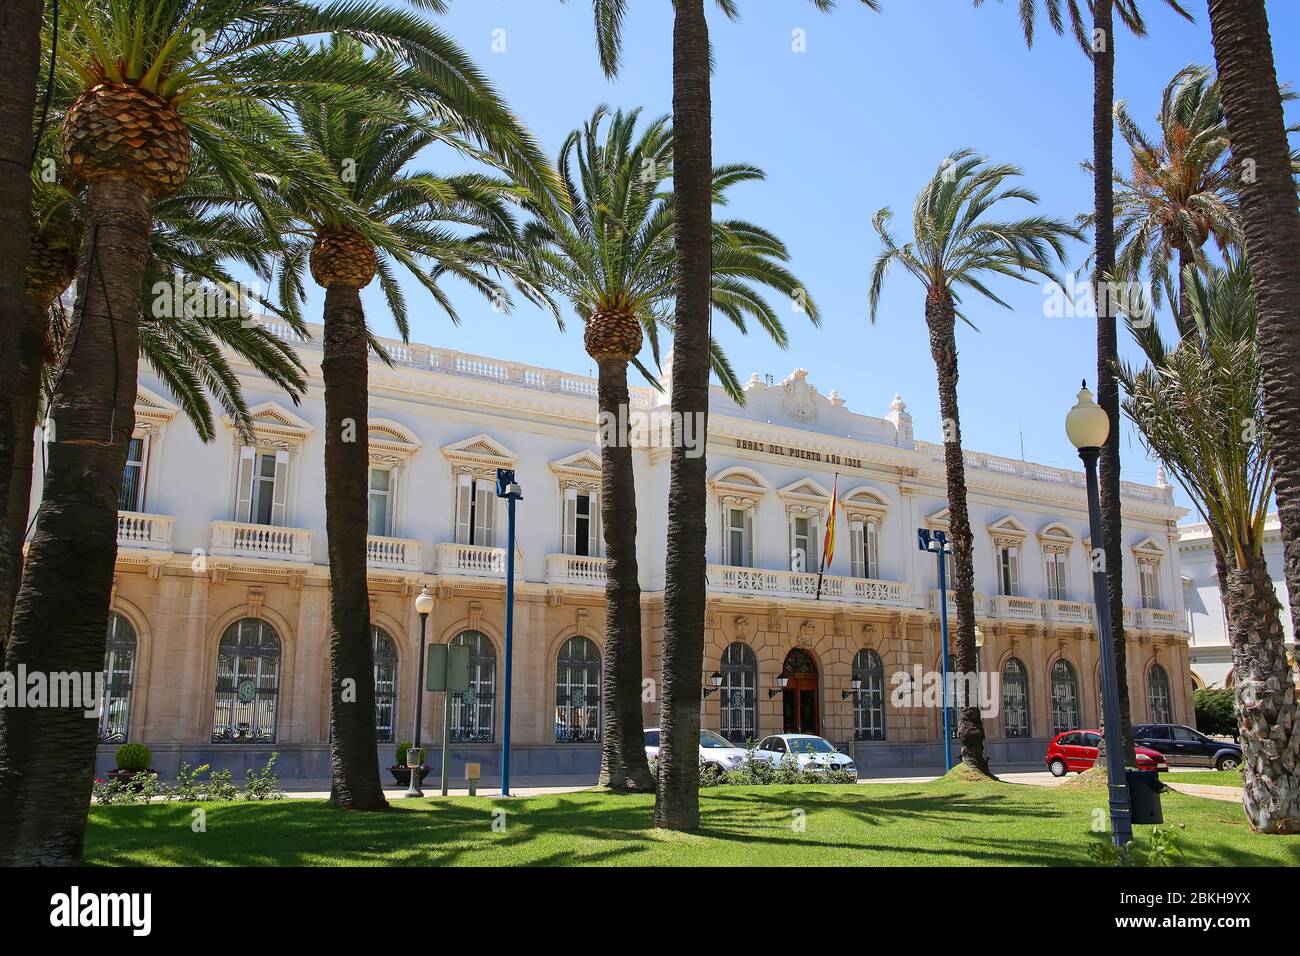 The beautiful Port Authority of Cartagena building under the palm trees, Murcia, Spain. Stock Photo